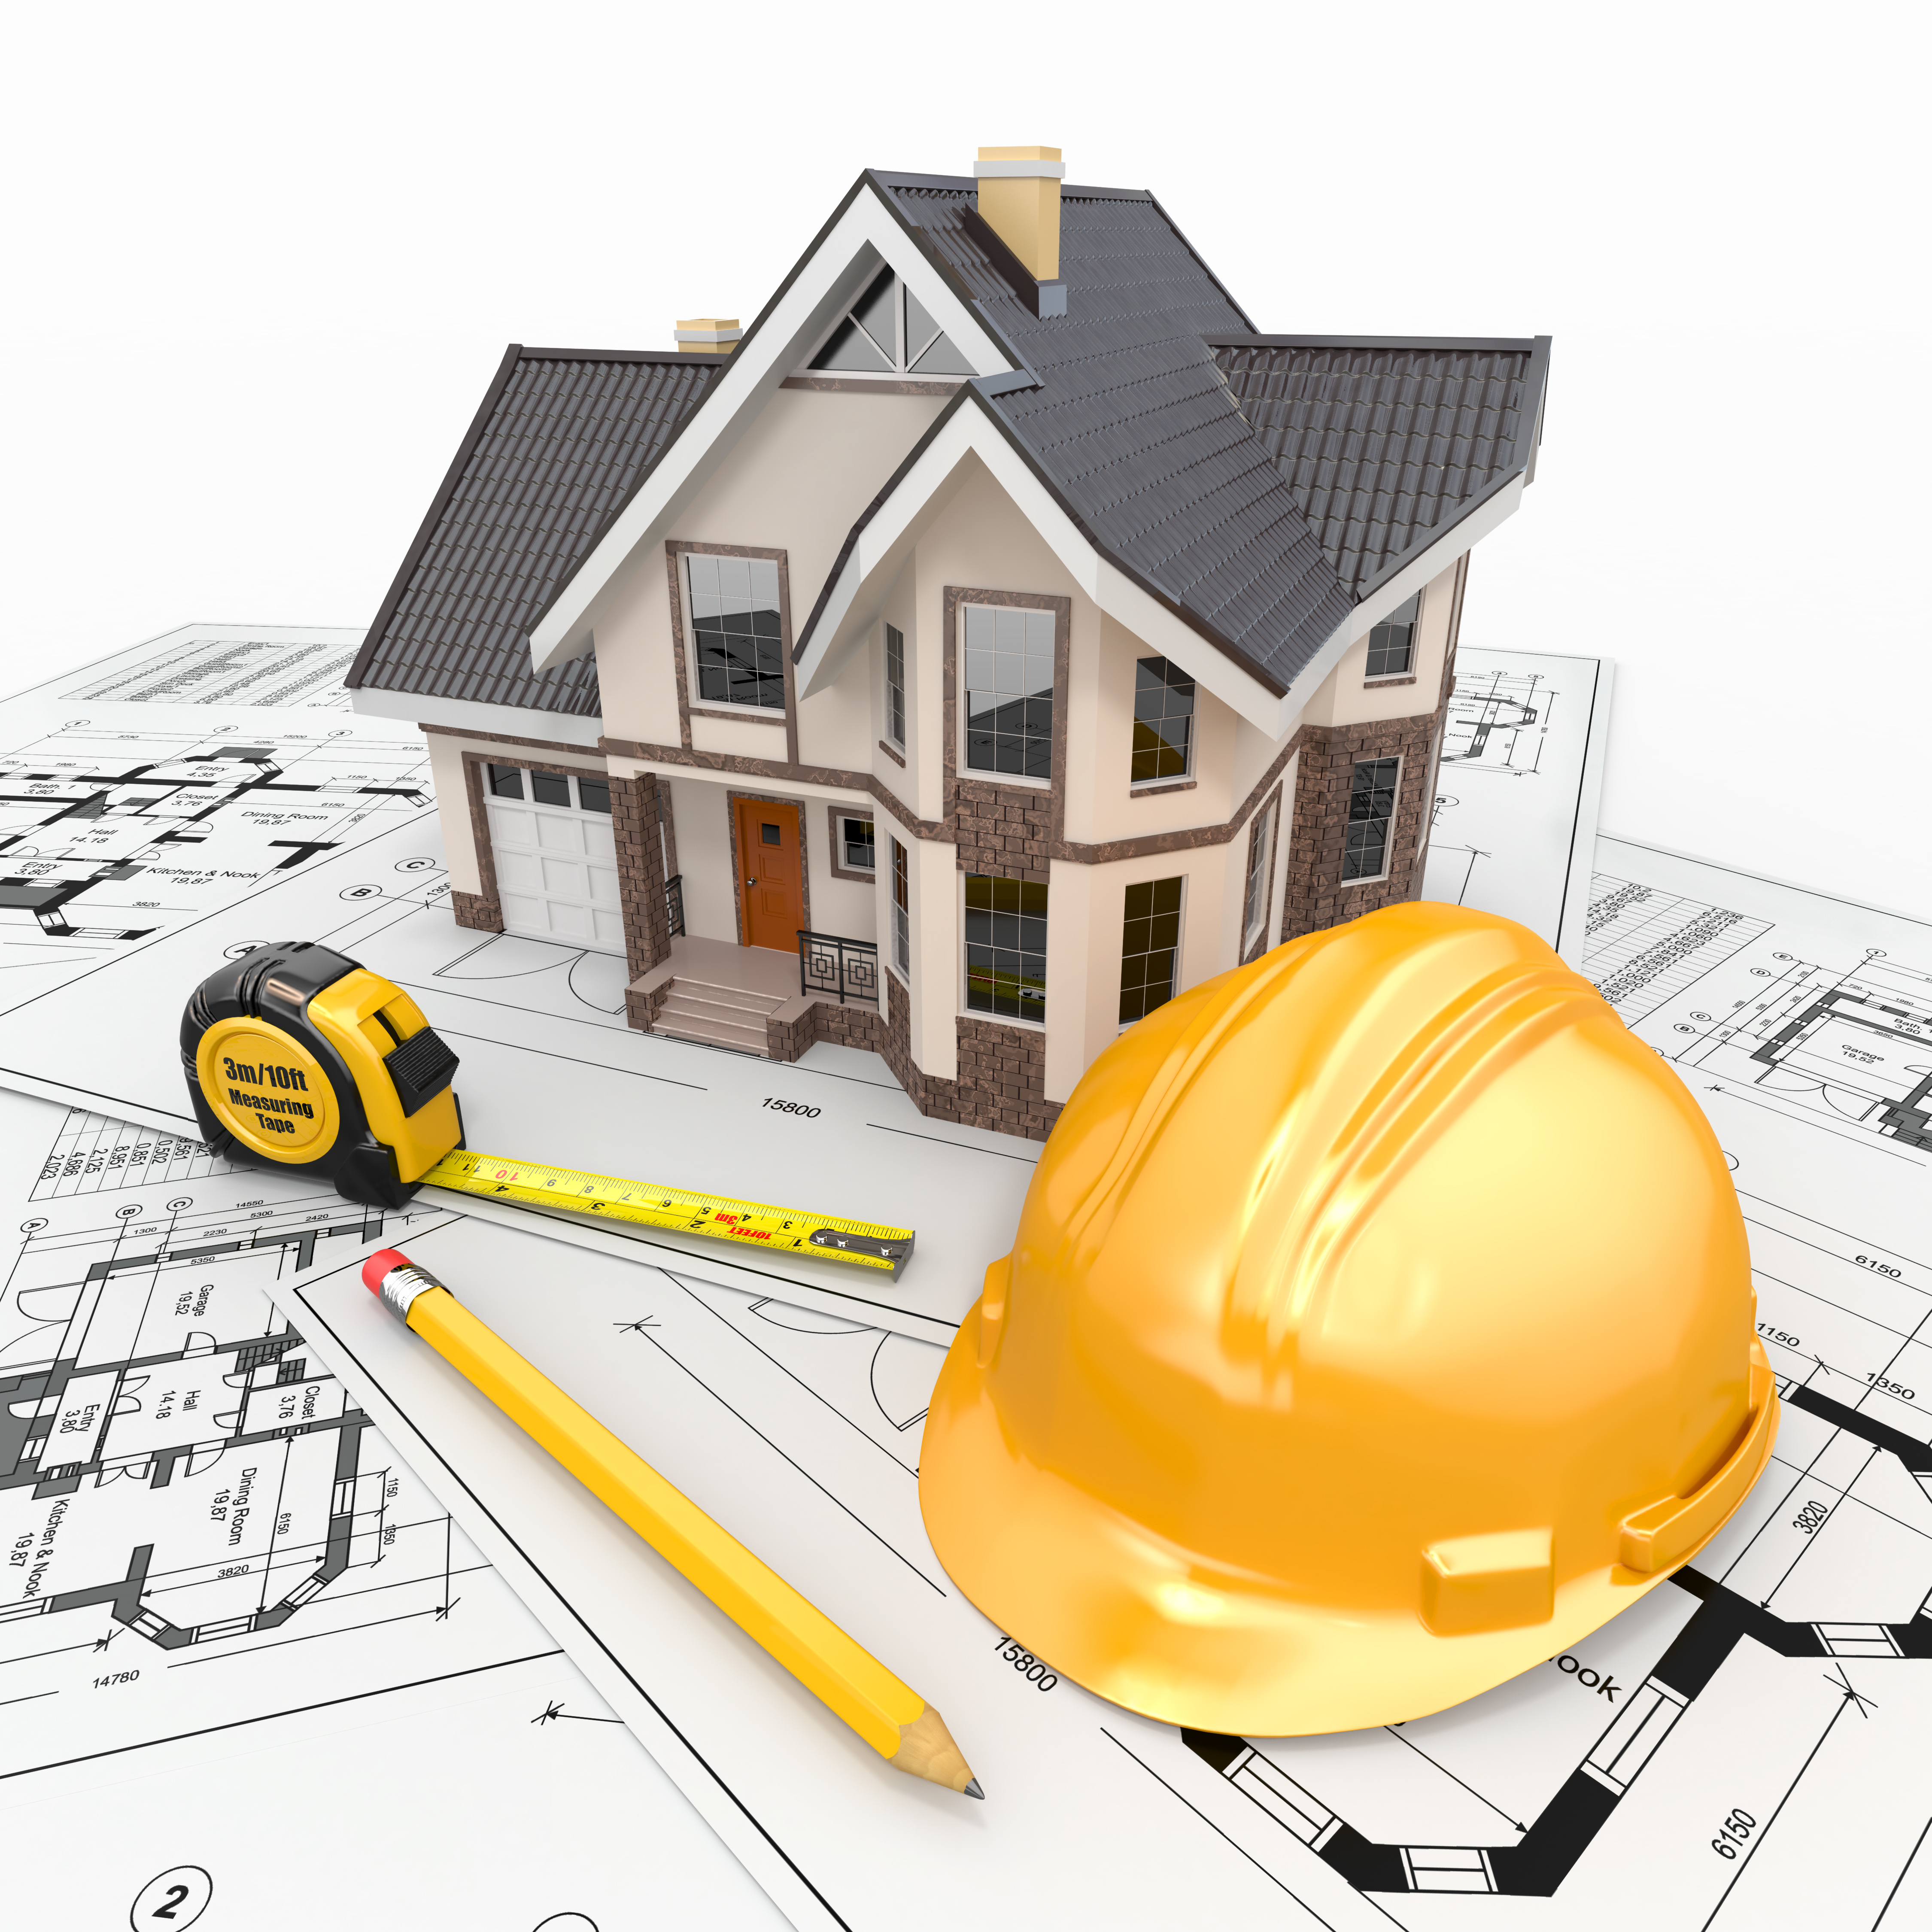 Thinking about new home construction? Here are 5 tips for success.